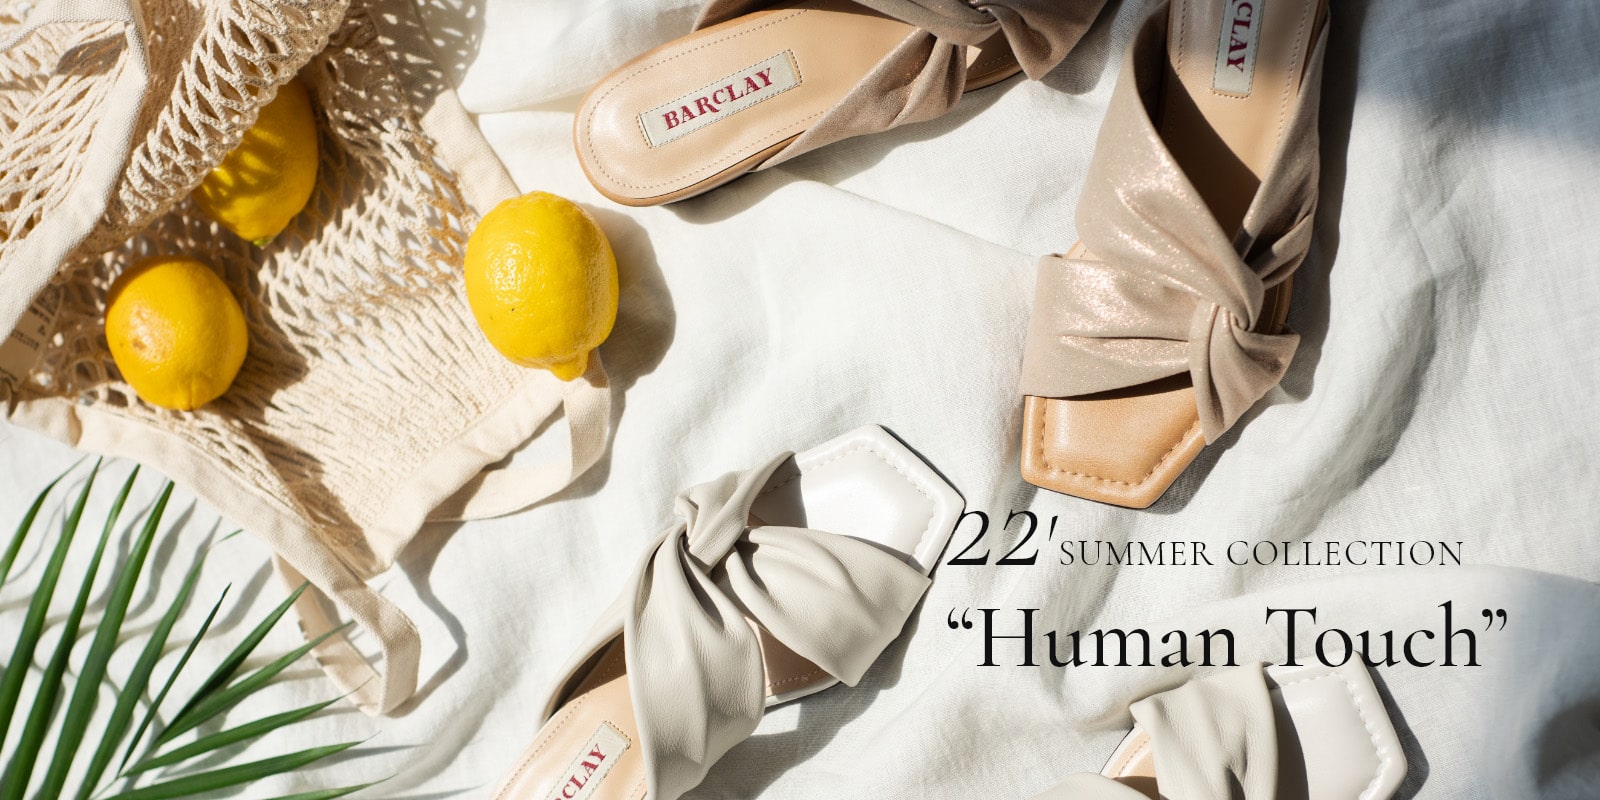 22' SUMMER　COLLECTION “Human Touch”